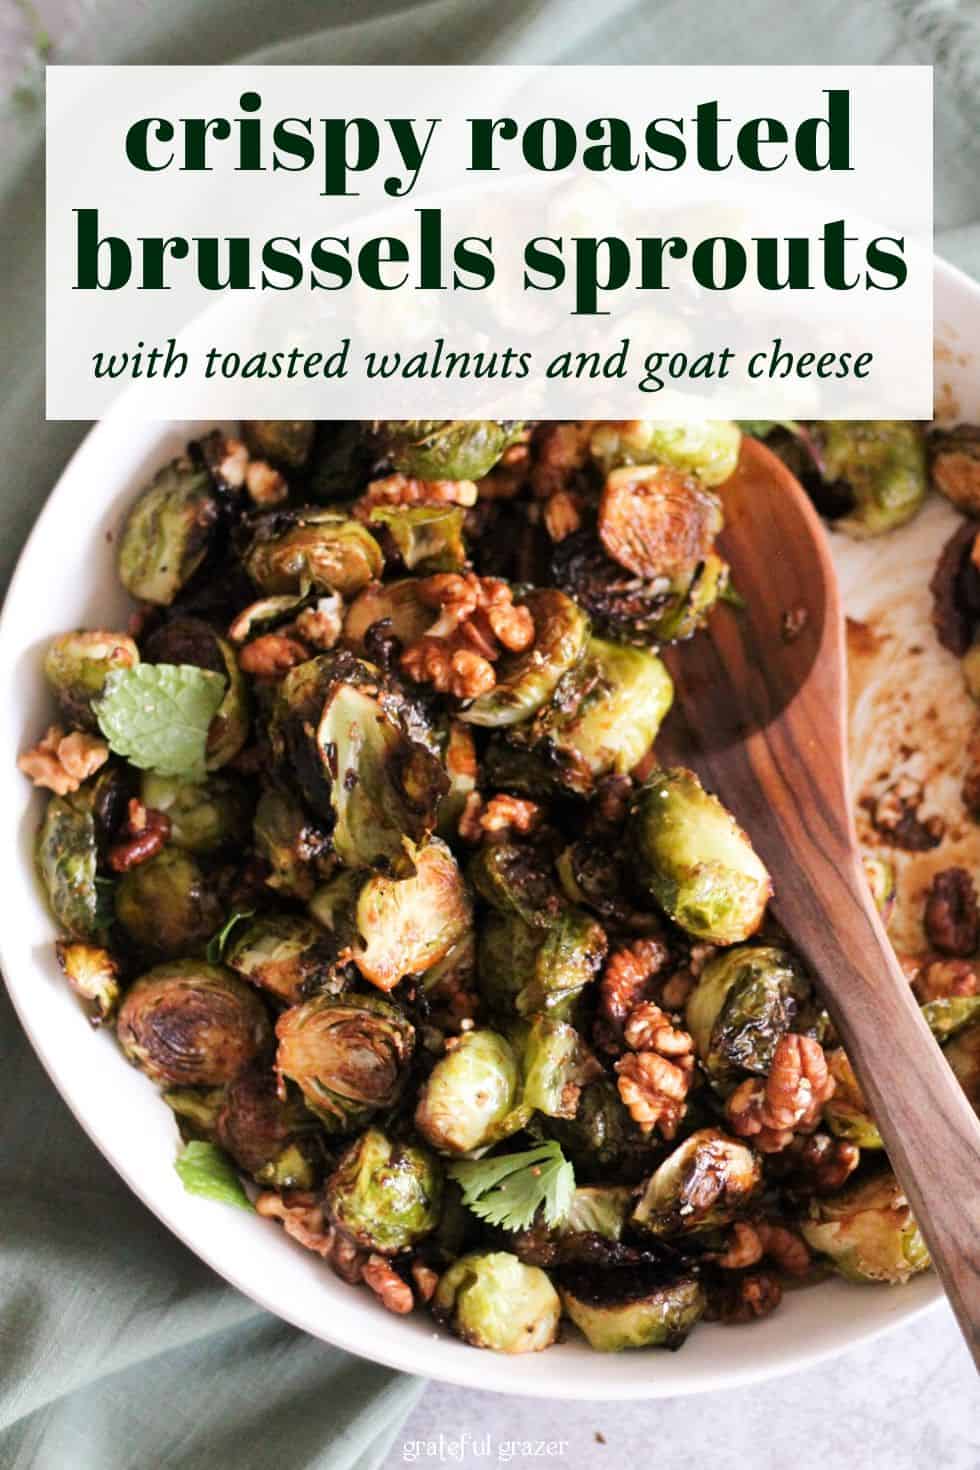 Brussels sprouts and walnuts in white dish with wooden spoon. Text reads, "Crispy Roasted Brussels Sprouts with Toasted Walnuts and Goat Cheese."